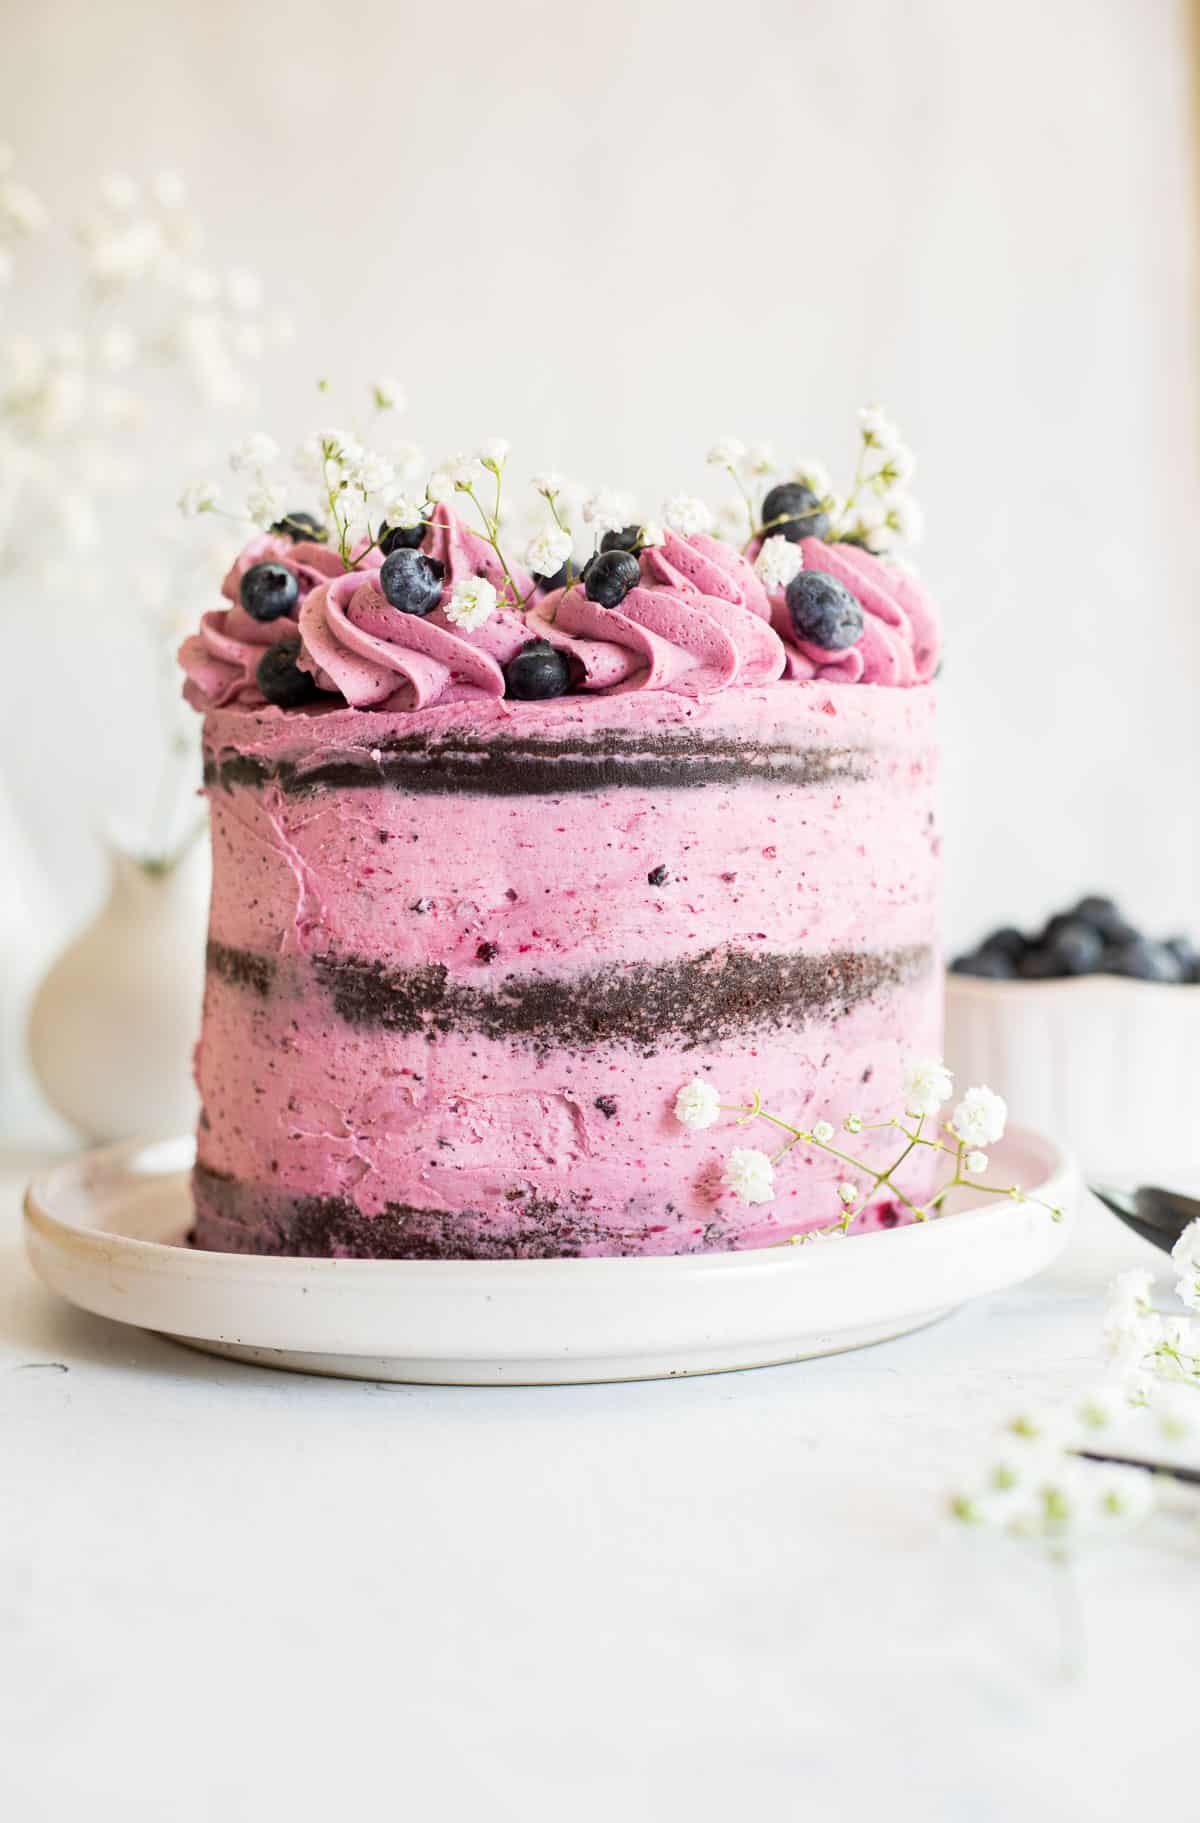 chocolate blueberry layer cake on a white plate.